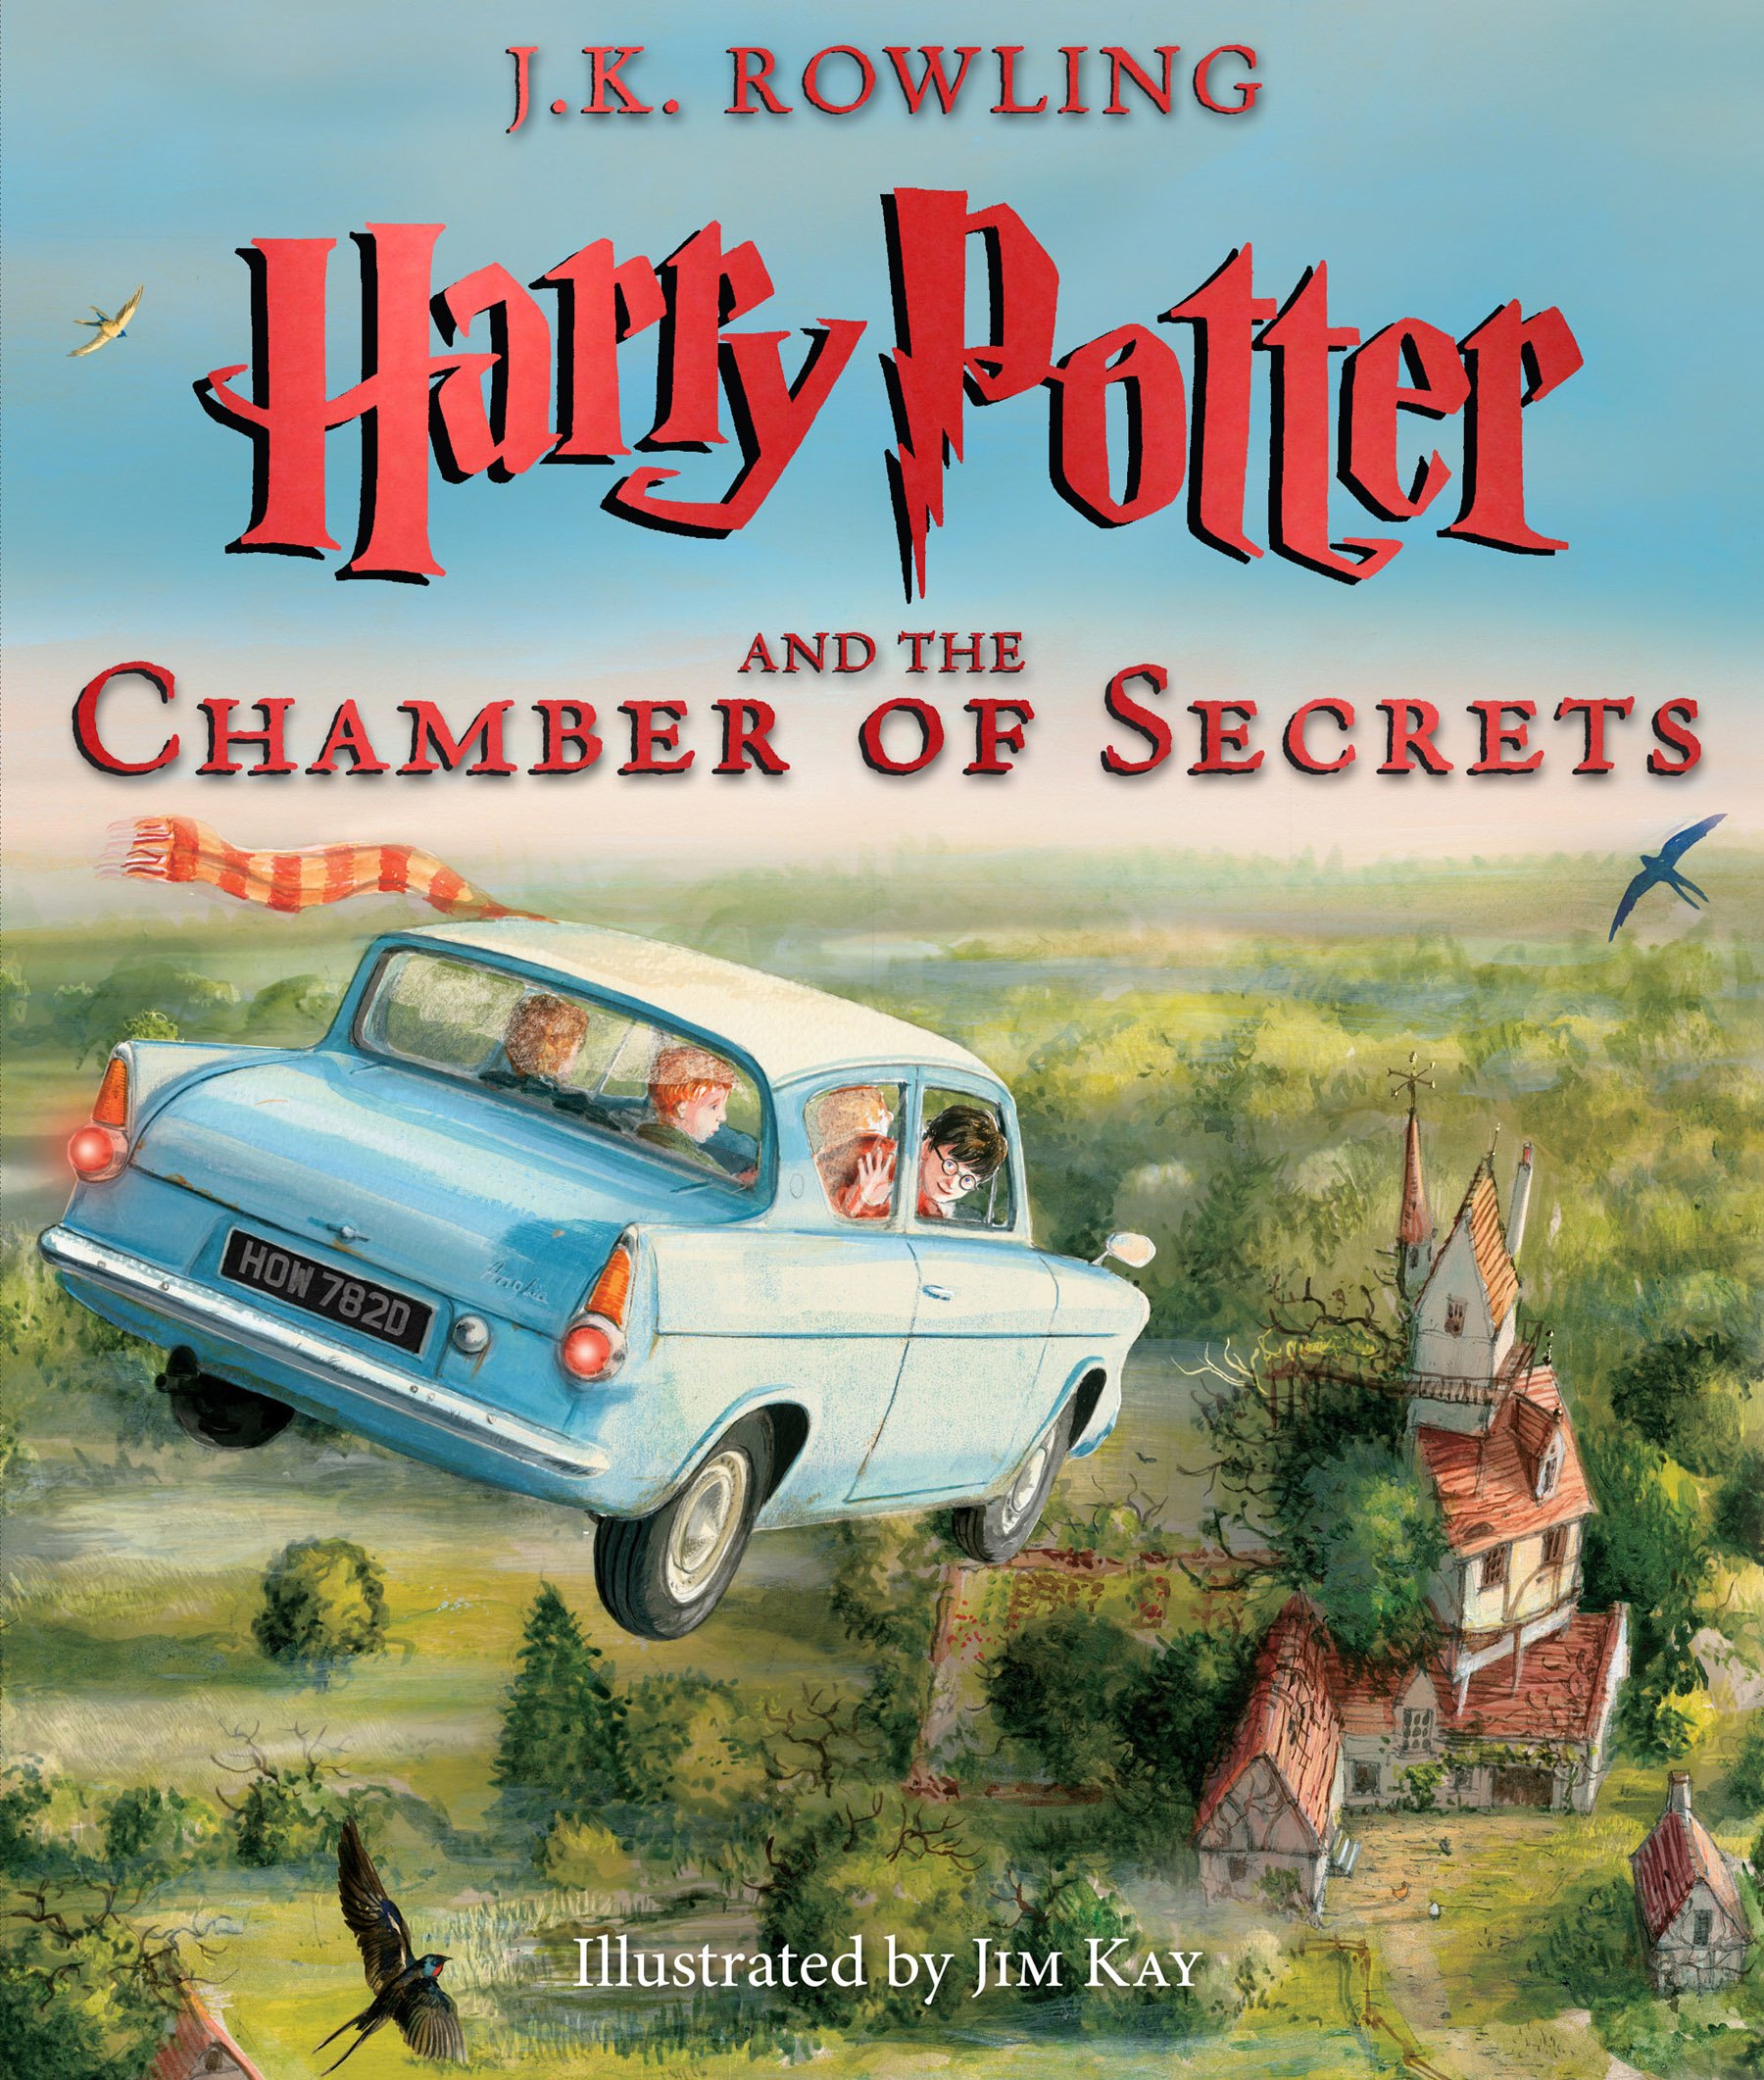 Harry Potter And The Chamber Of Secrets HD wallpapers, Desktop wallpaper - most viewed